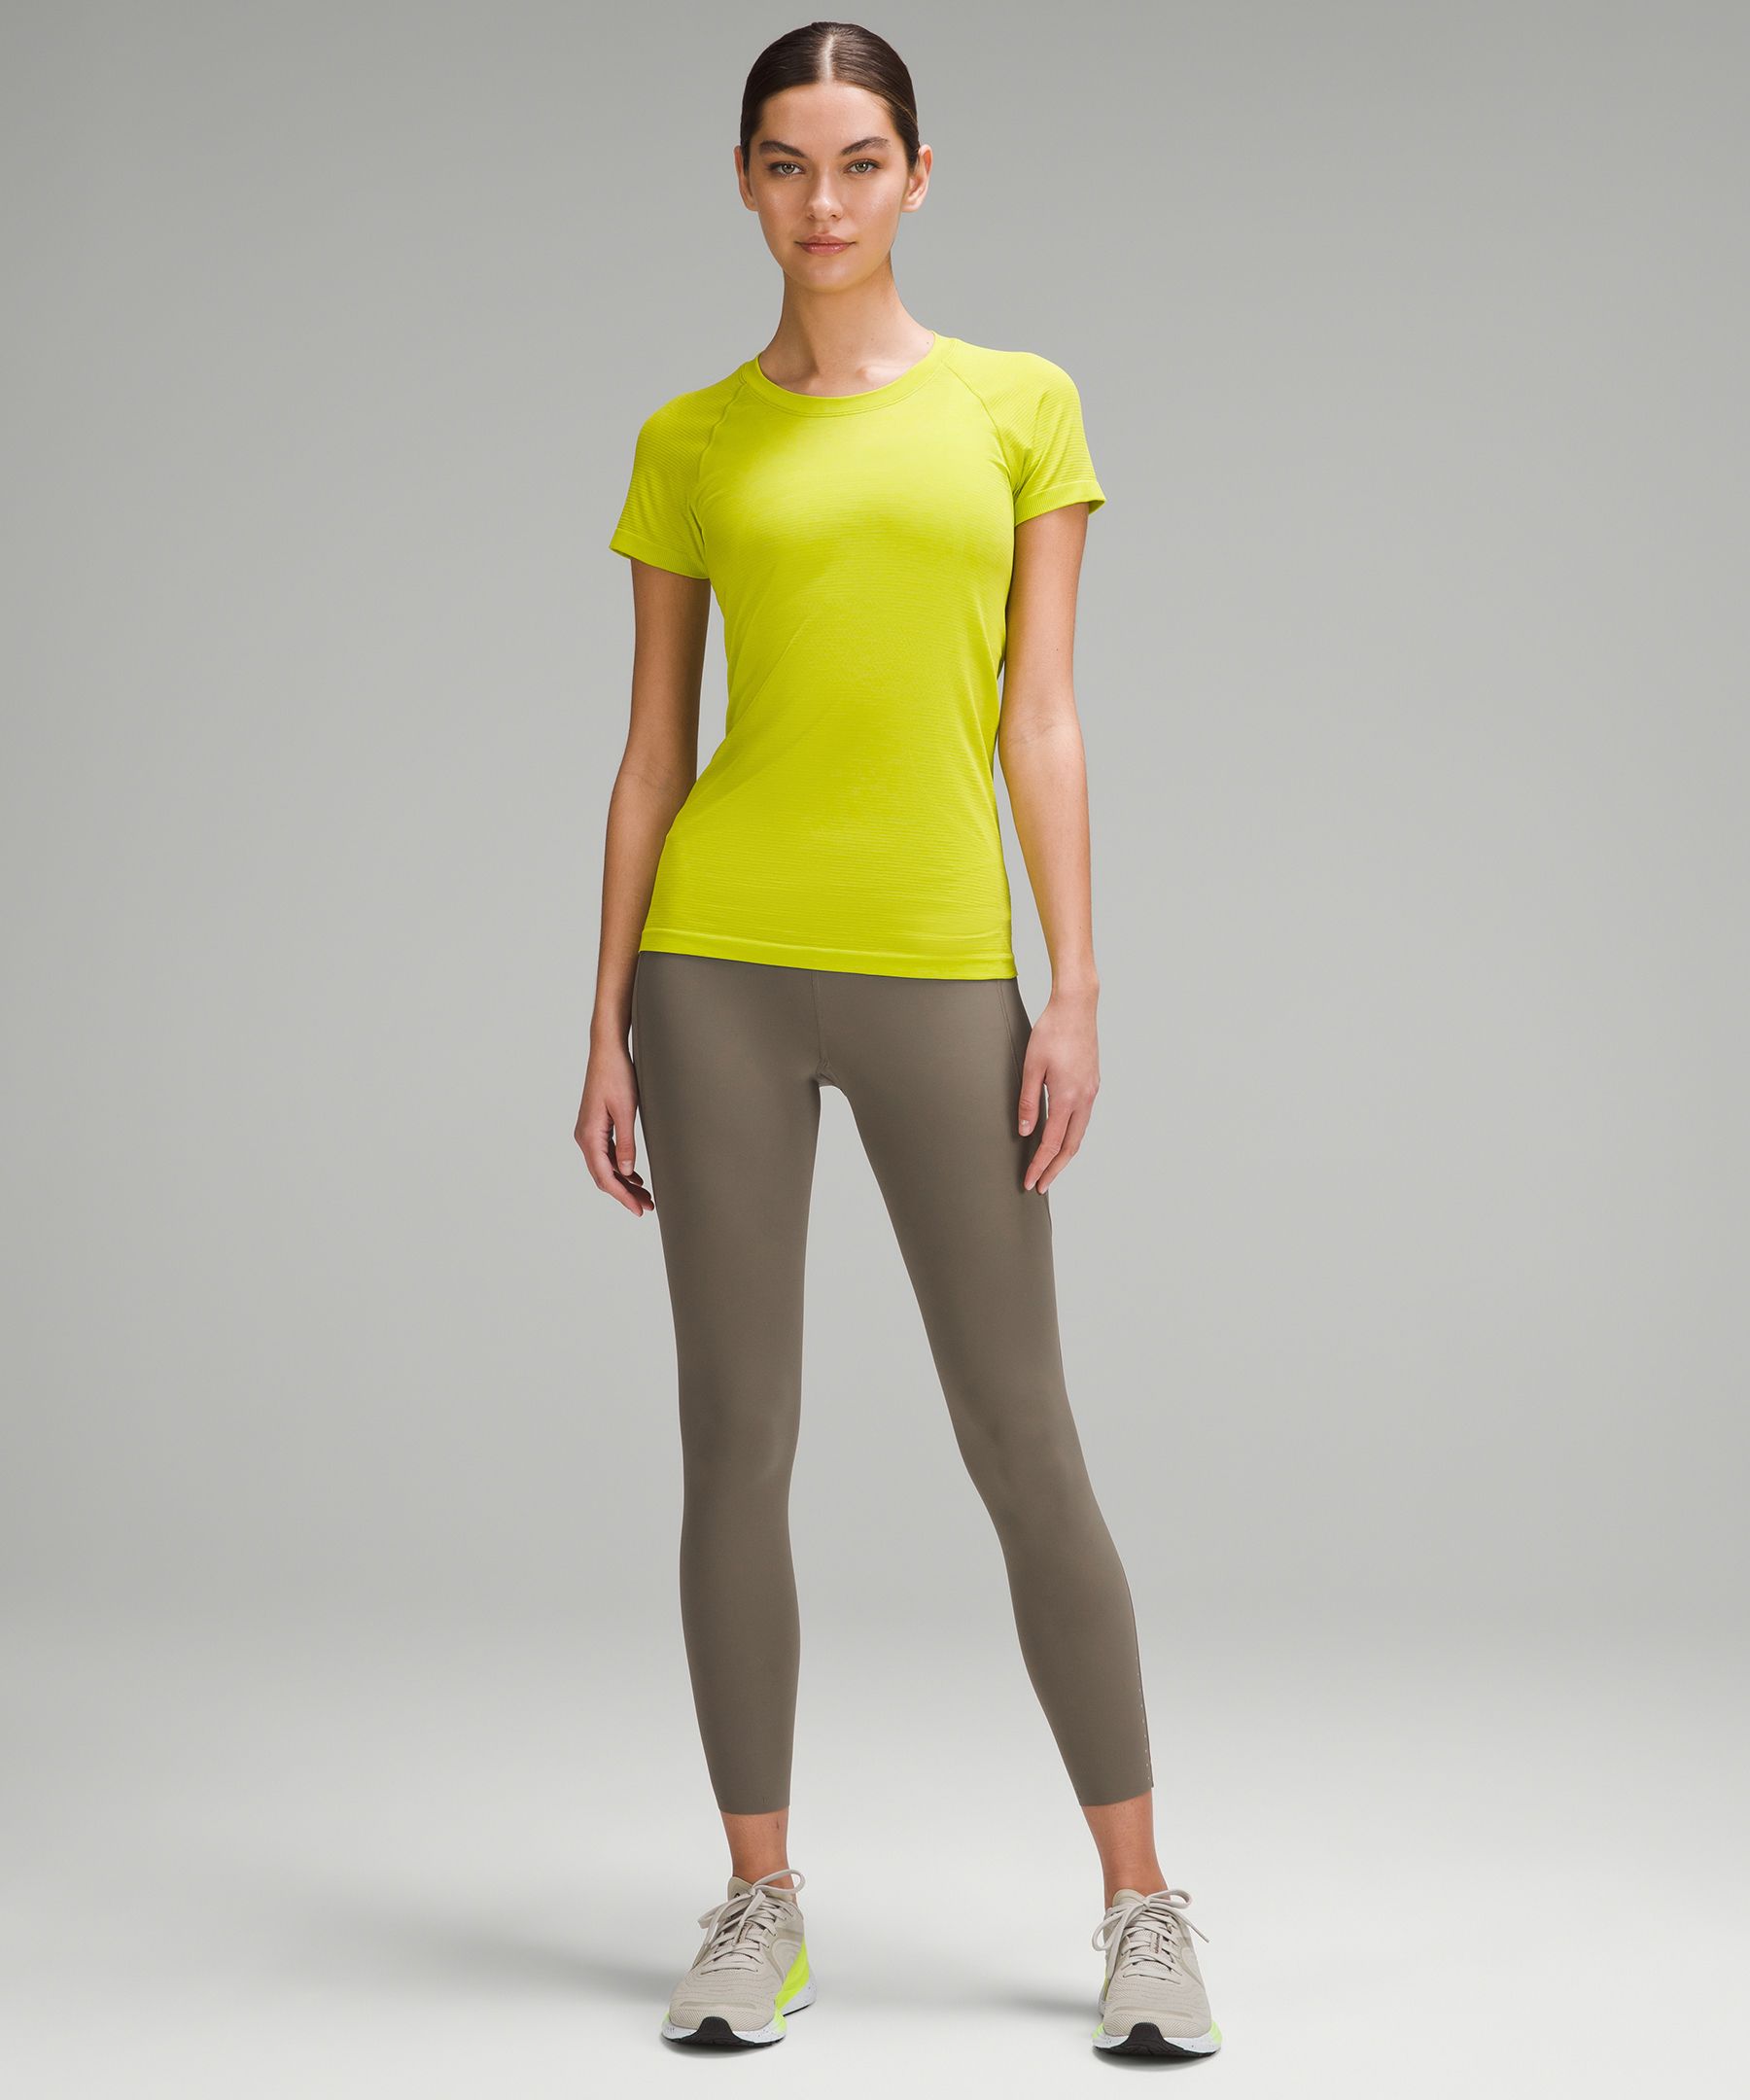 Running Stuff from a Yoga Store? lululemon Product Review – Speedy Lizard